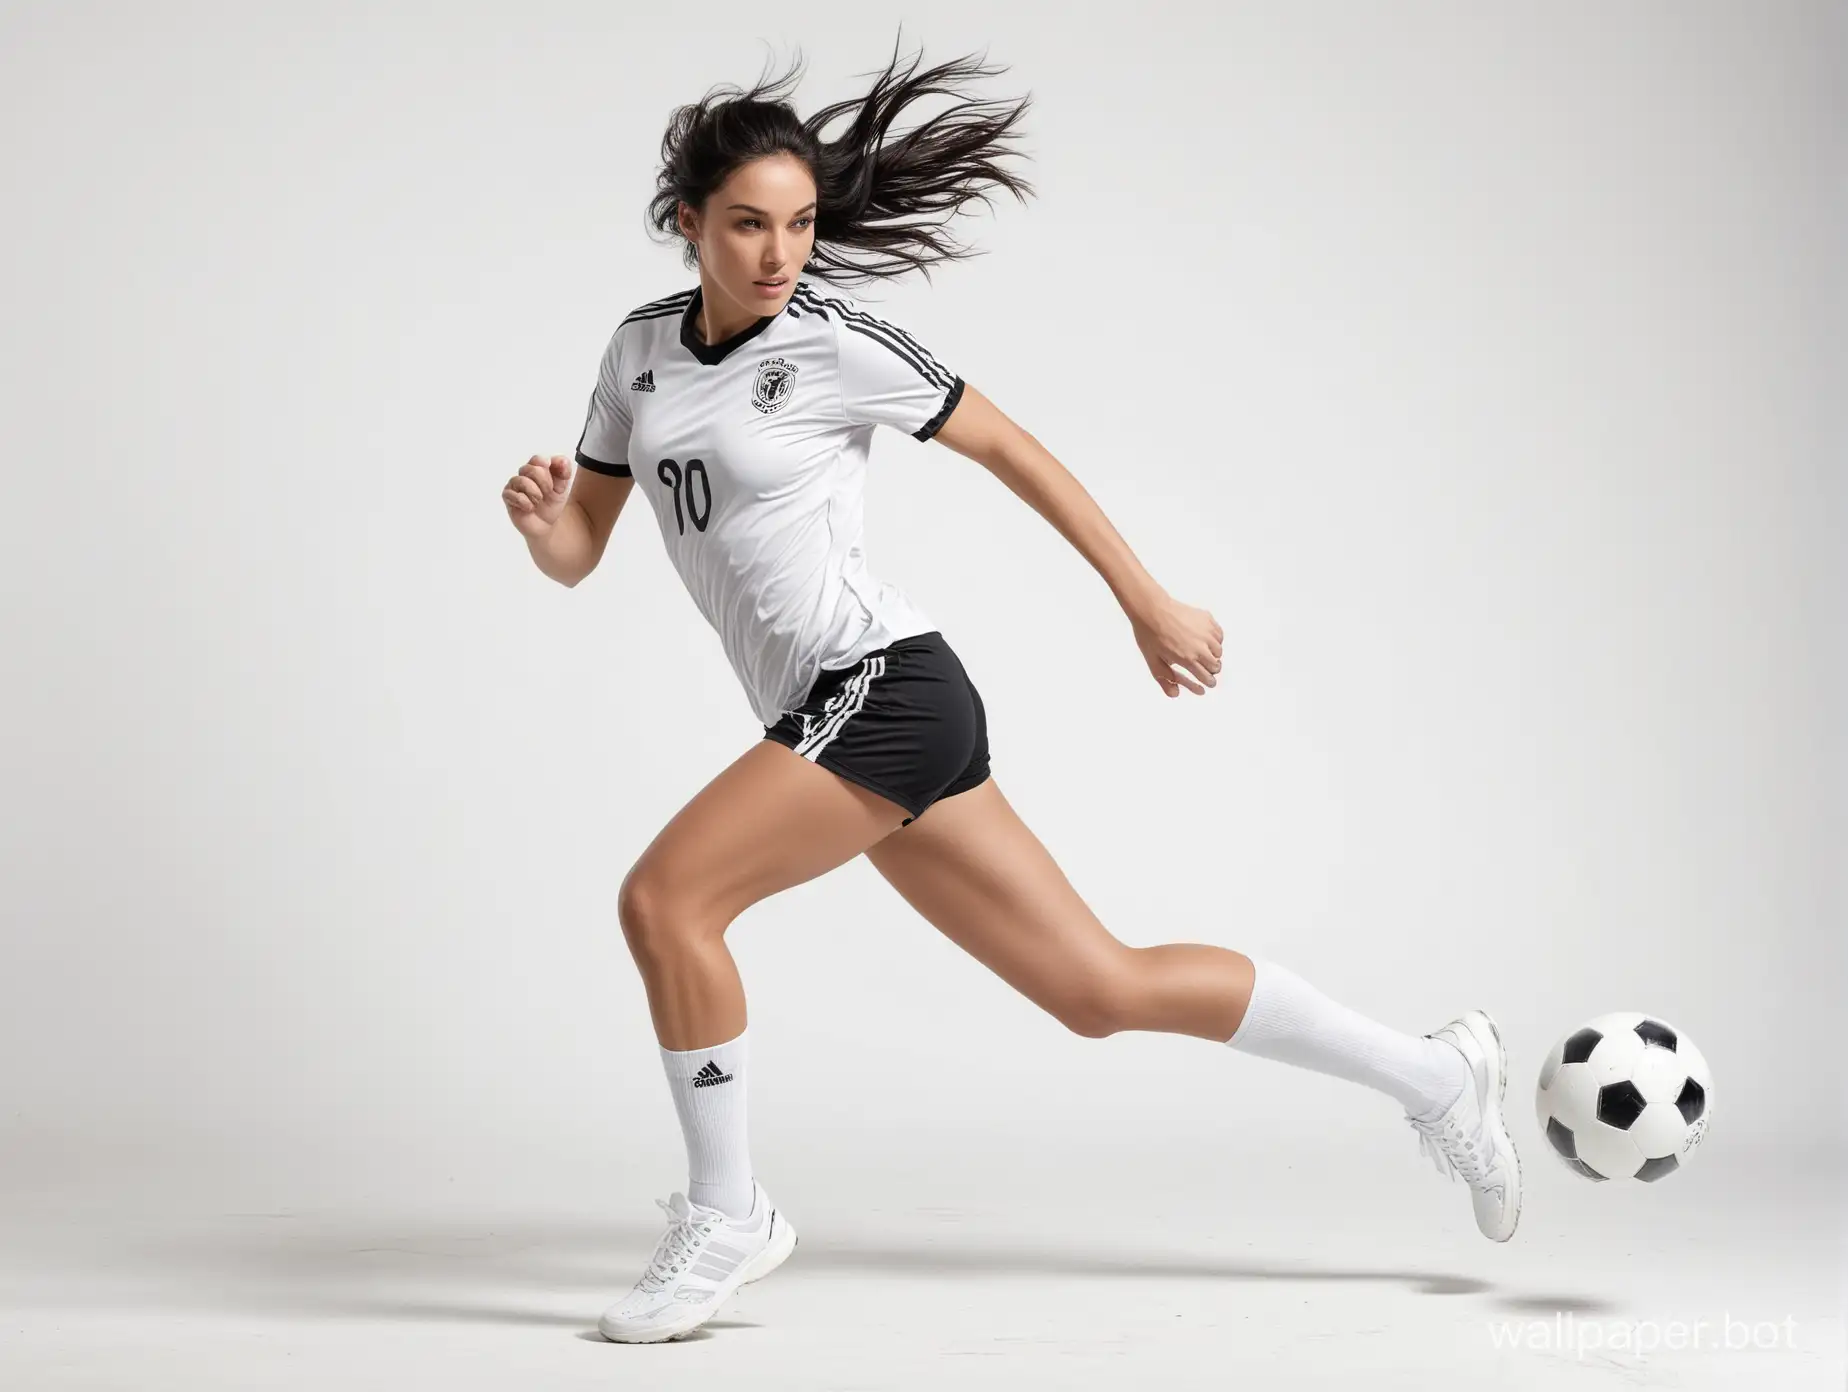 Young-Female-Soccer-Player-Dal-Gadot-Lookalike-in-Classic-Uniform-Scoring-Goal